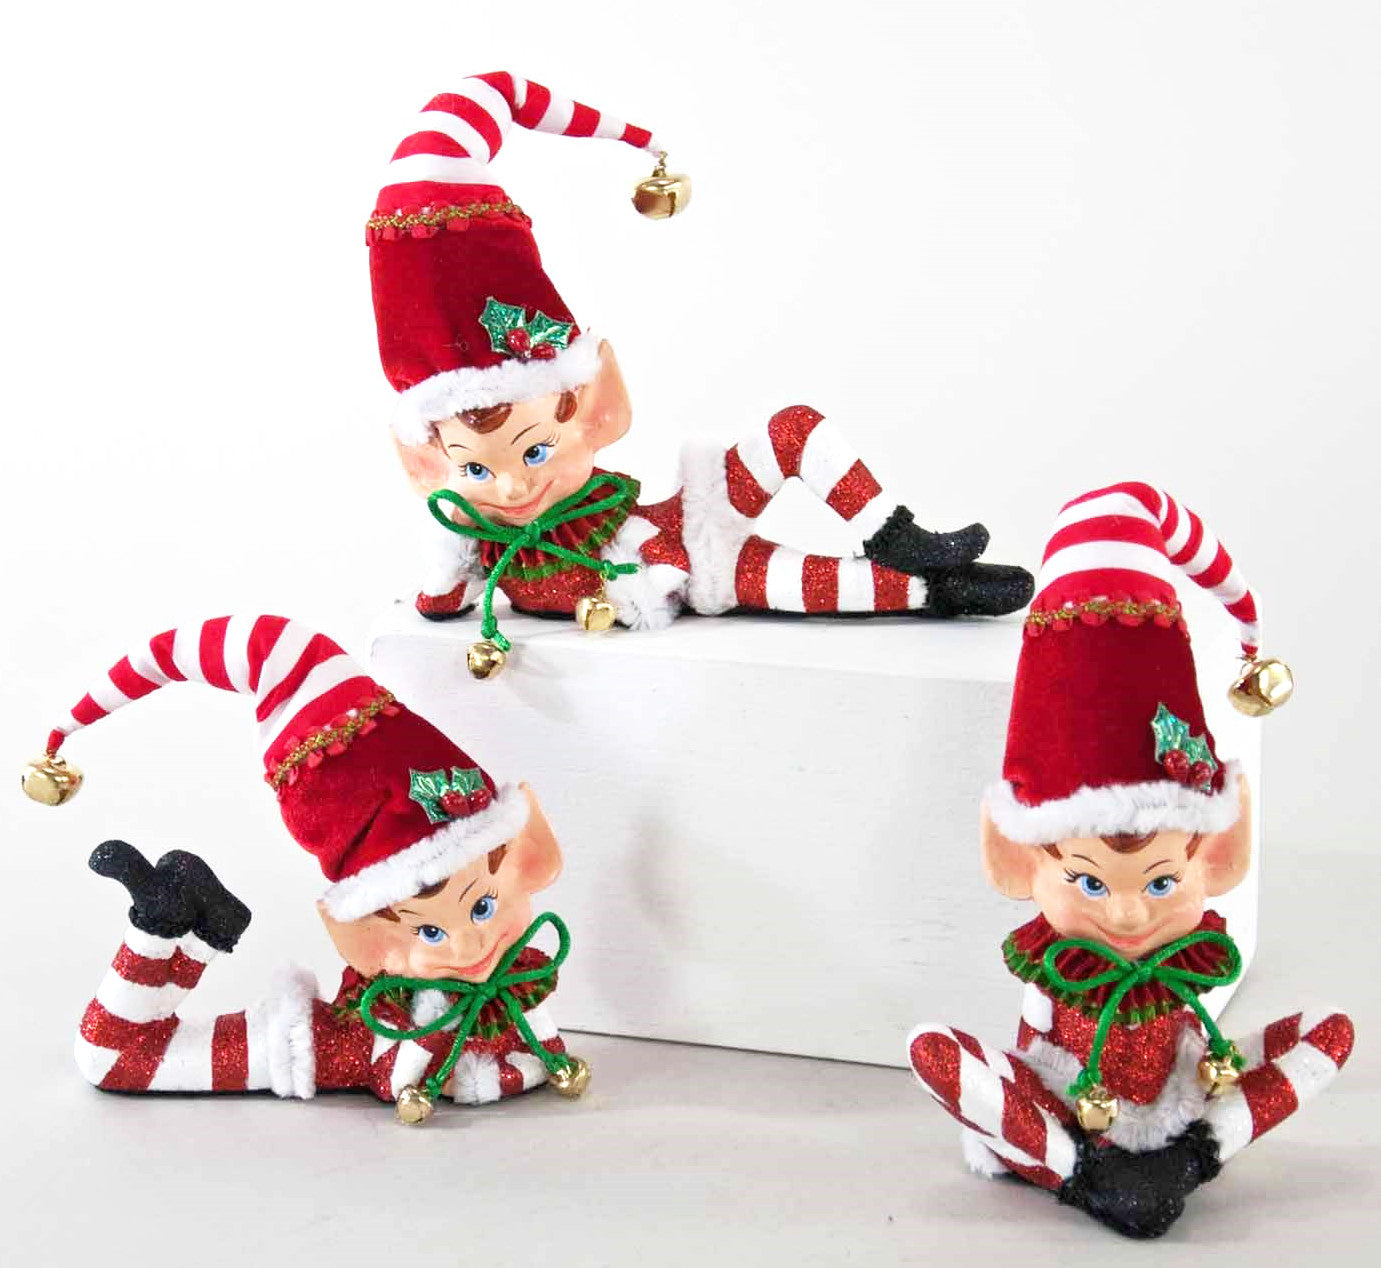 Retro Elf Ornaments with red and white stripes